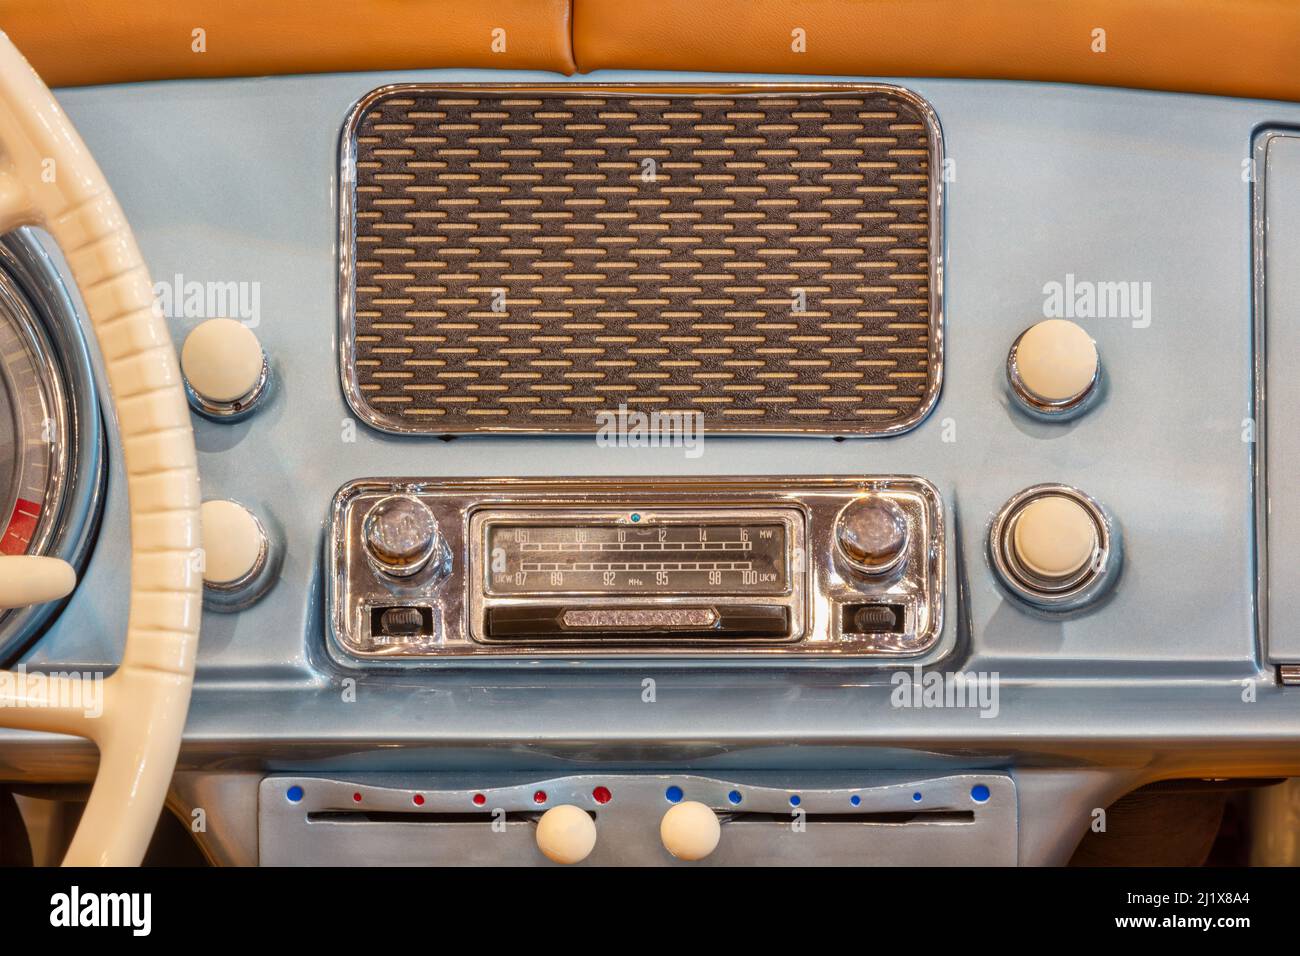 Old chrome car radio with speaker inside a classic American car Stock Photo